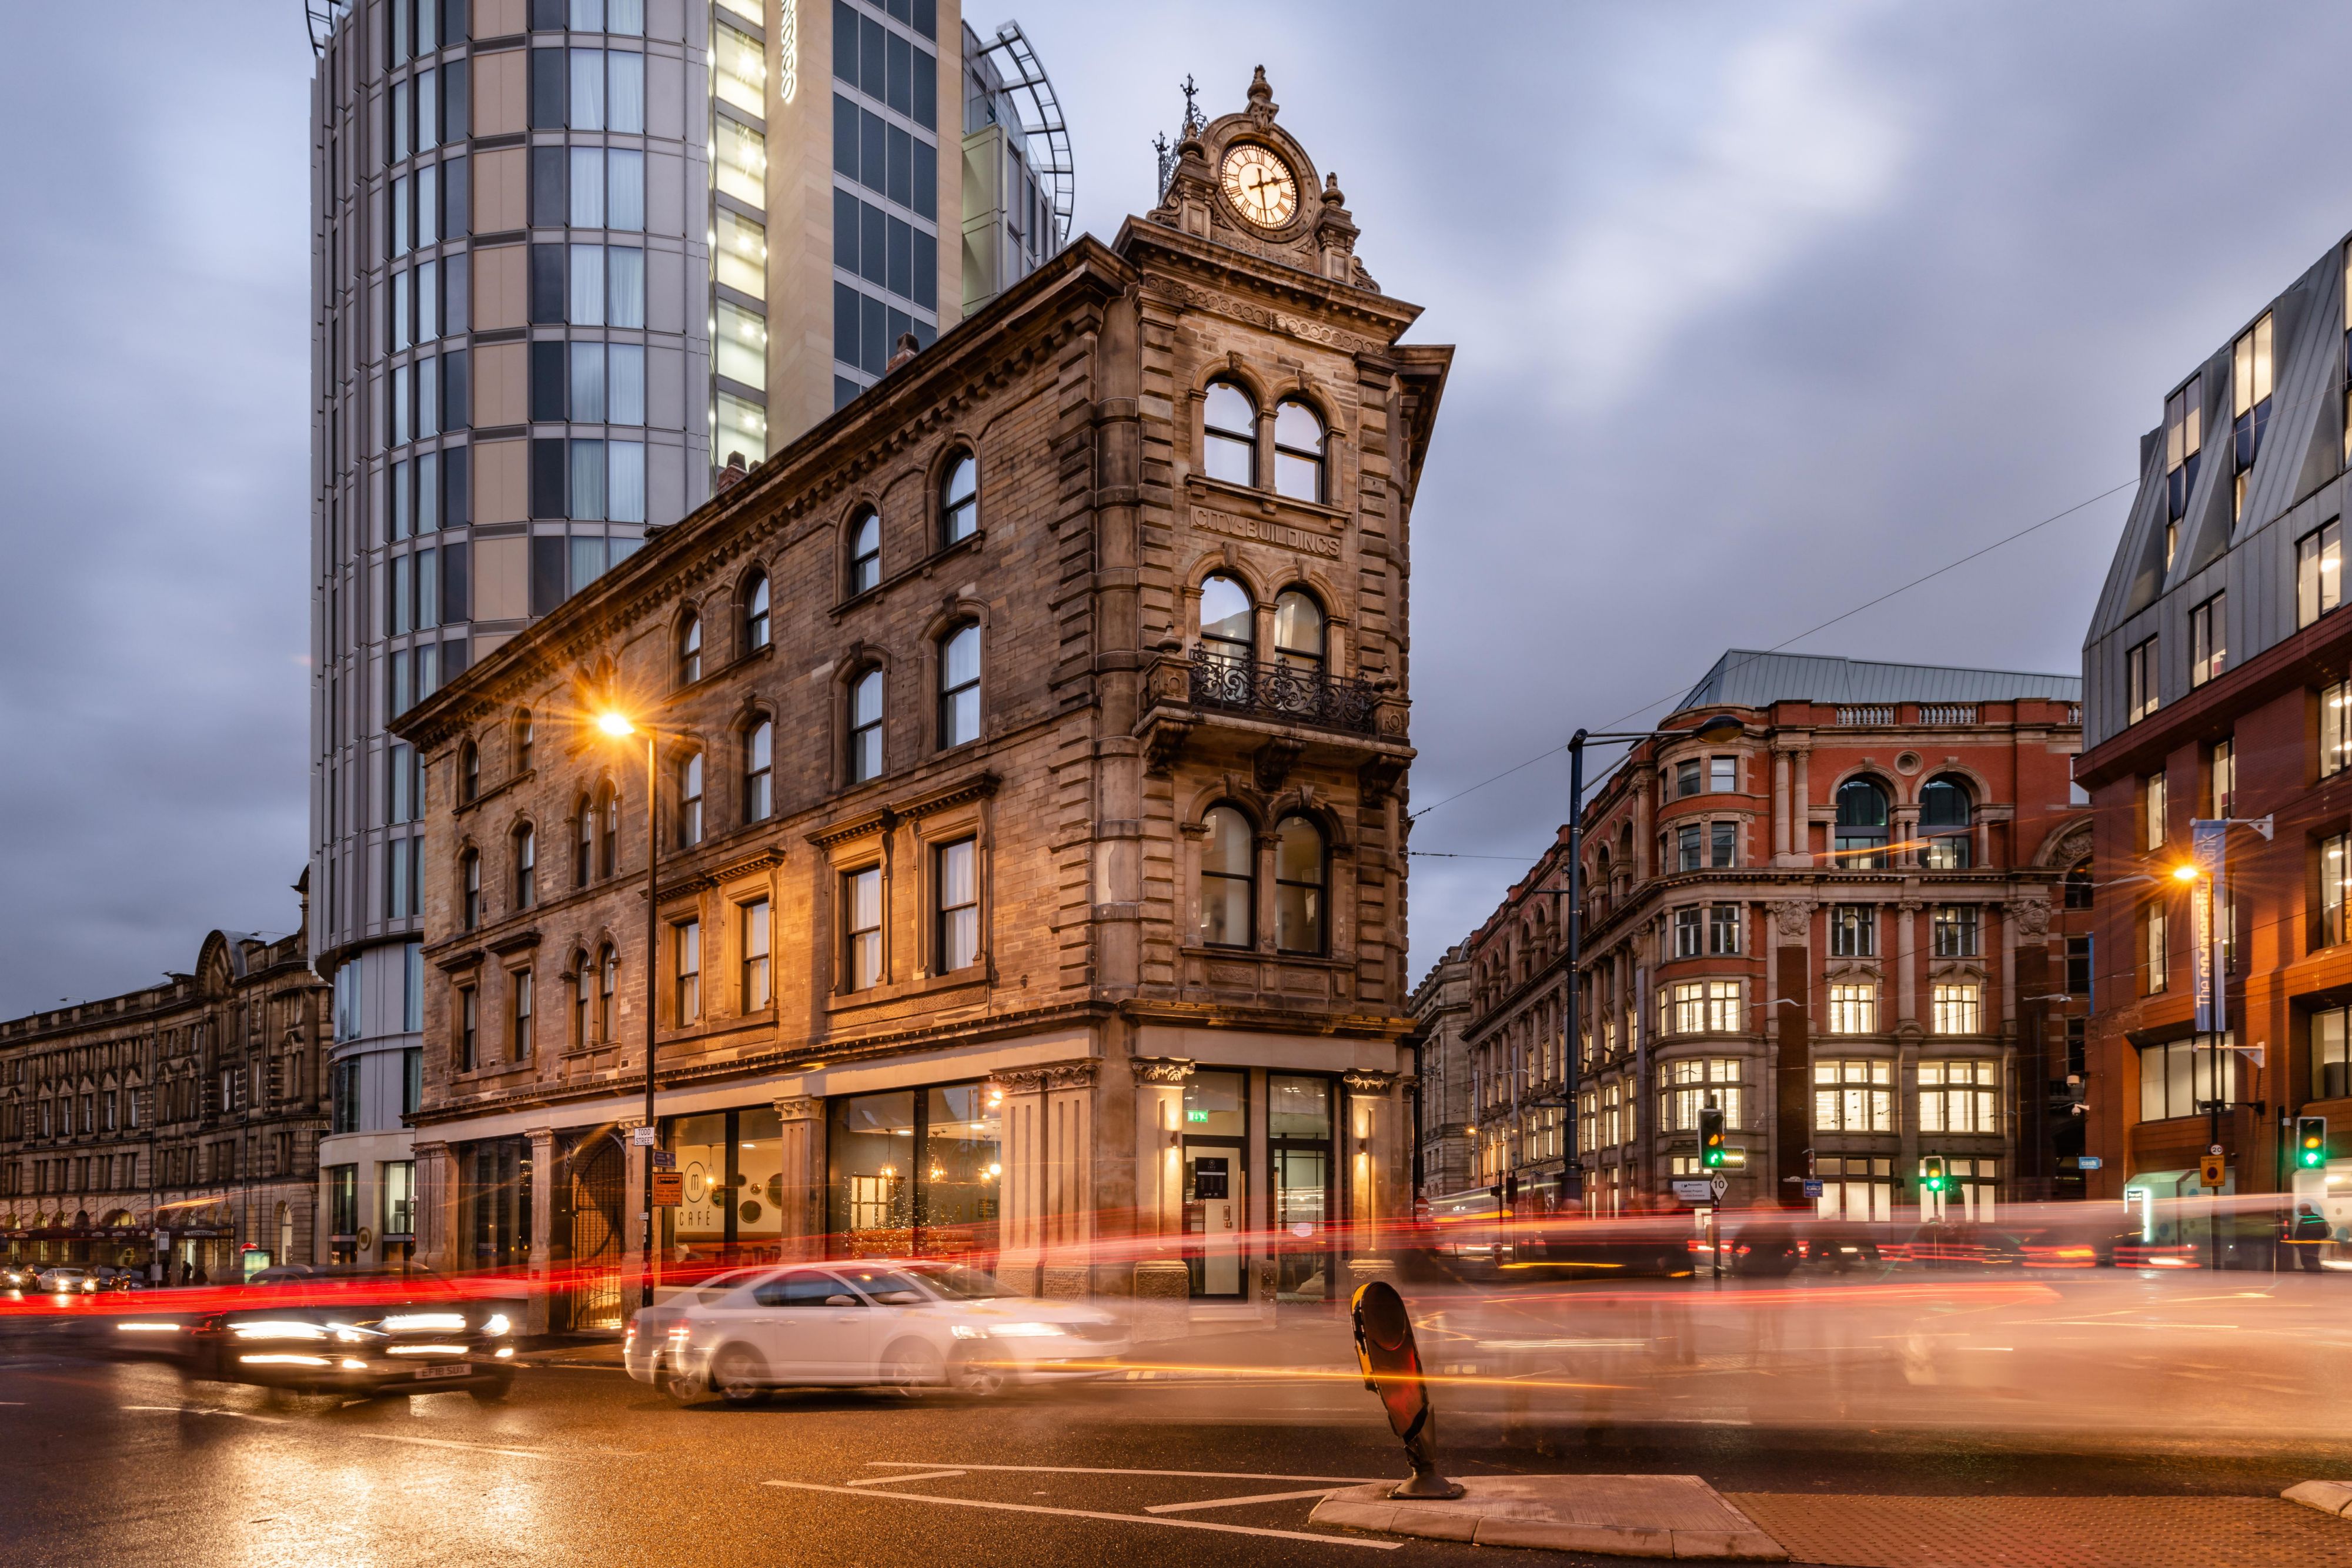 Sat in Manchester's bustling and diverse city centre and conveniently adjacent to Manchester Victoria train station. Local attractions just minutes away include the Northern Quarter, AO Arena, Printworks, The National Football Museum, Arndale Centre and many more. 